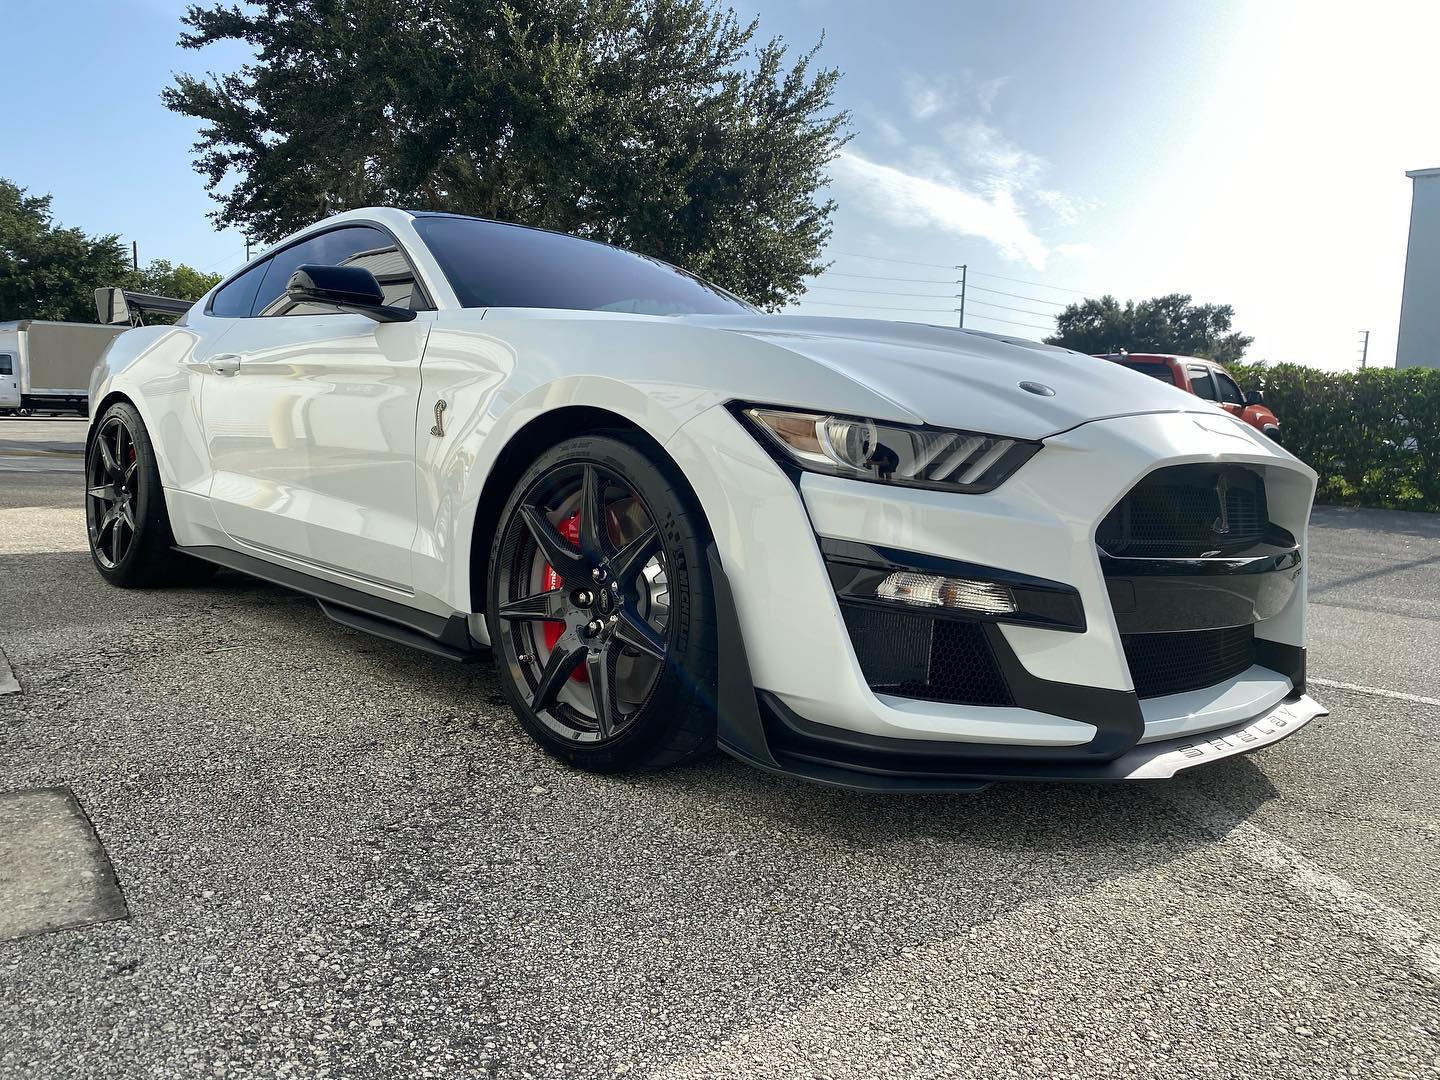 2022 White Mustang GT500 Track Pack Edition Car Detailing Orlando FL